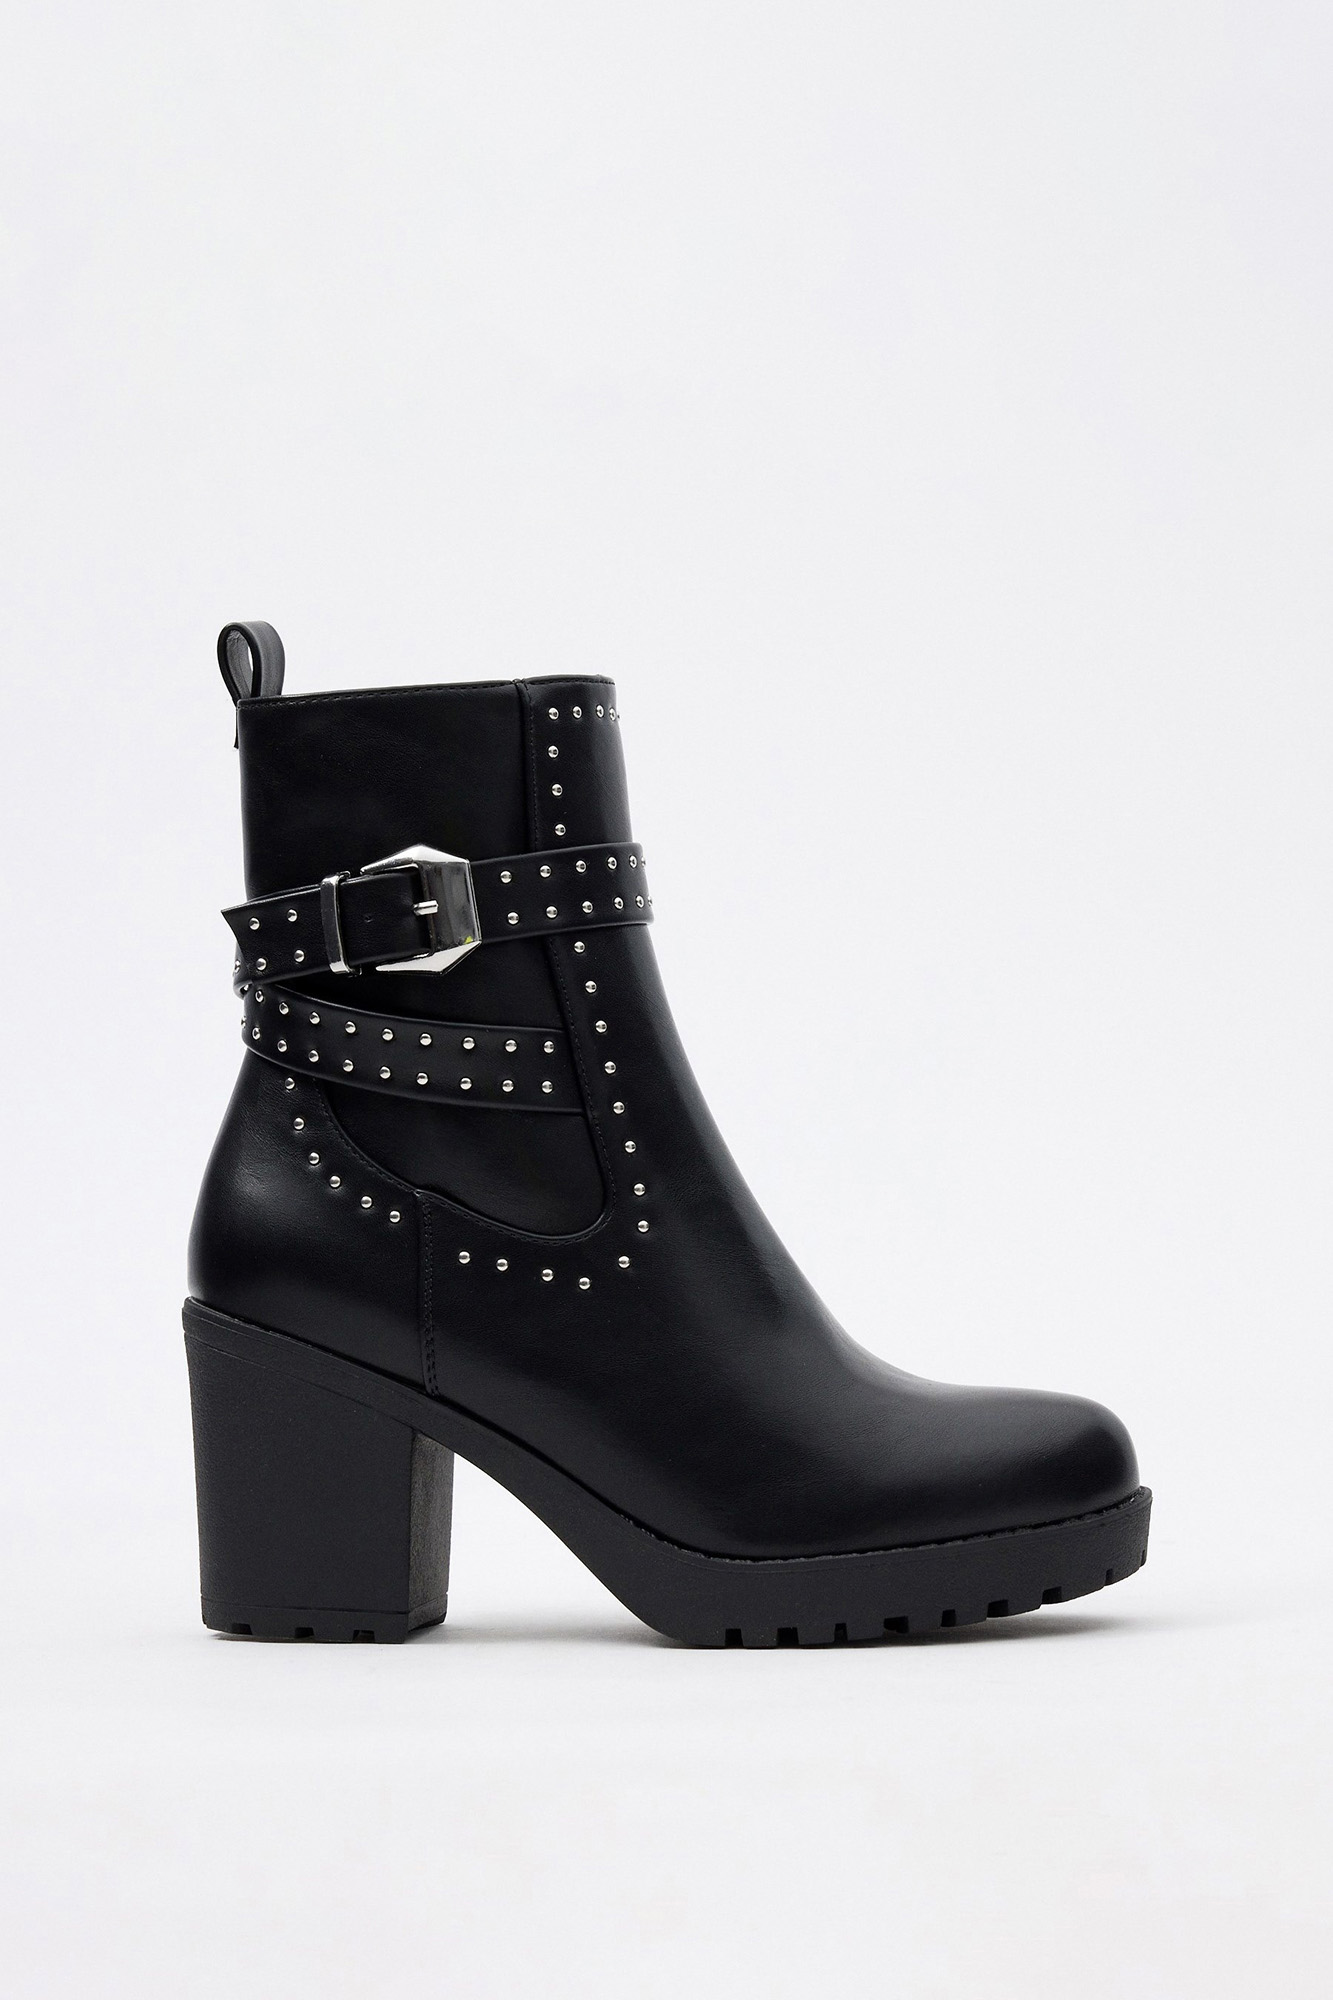 Gothic Pointed Toe Square Heels Ankle Boots - UrbanWearOutsiders